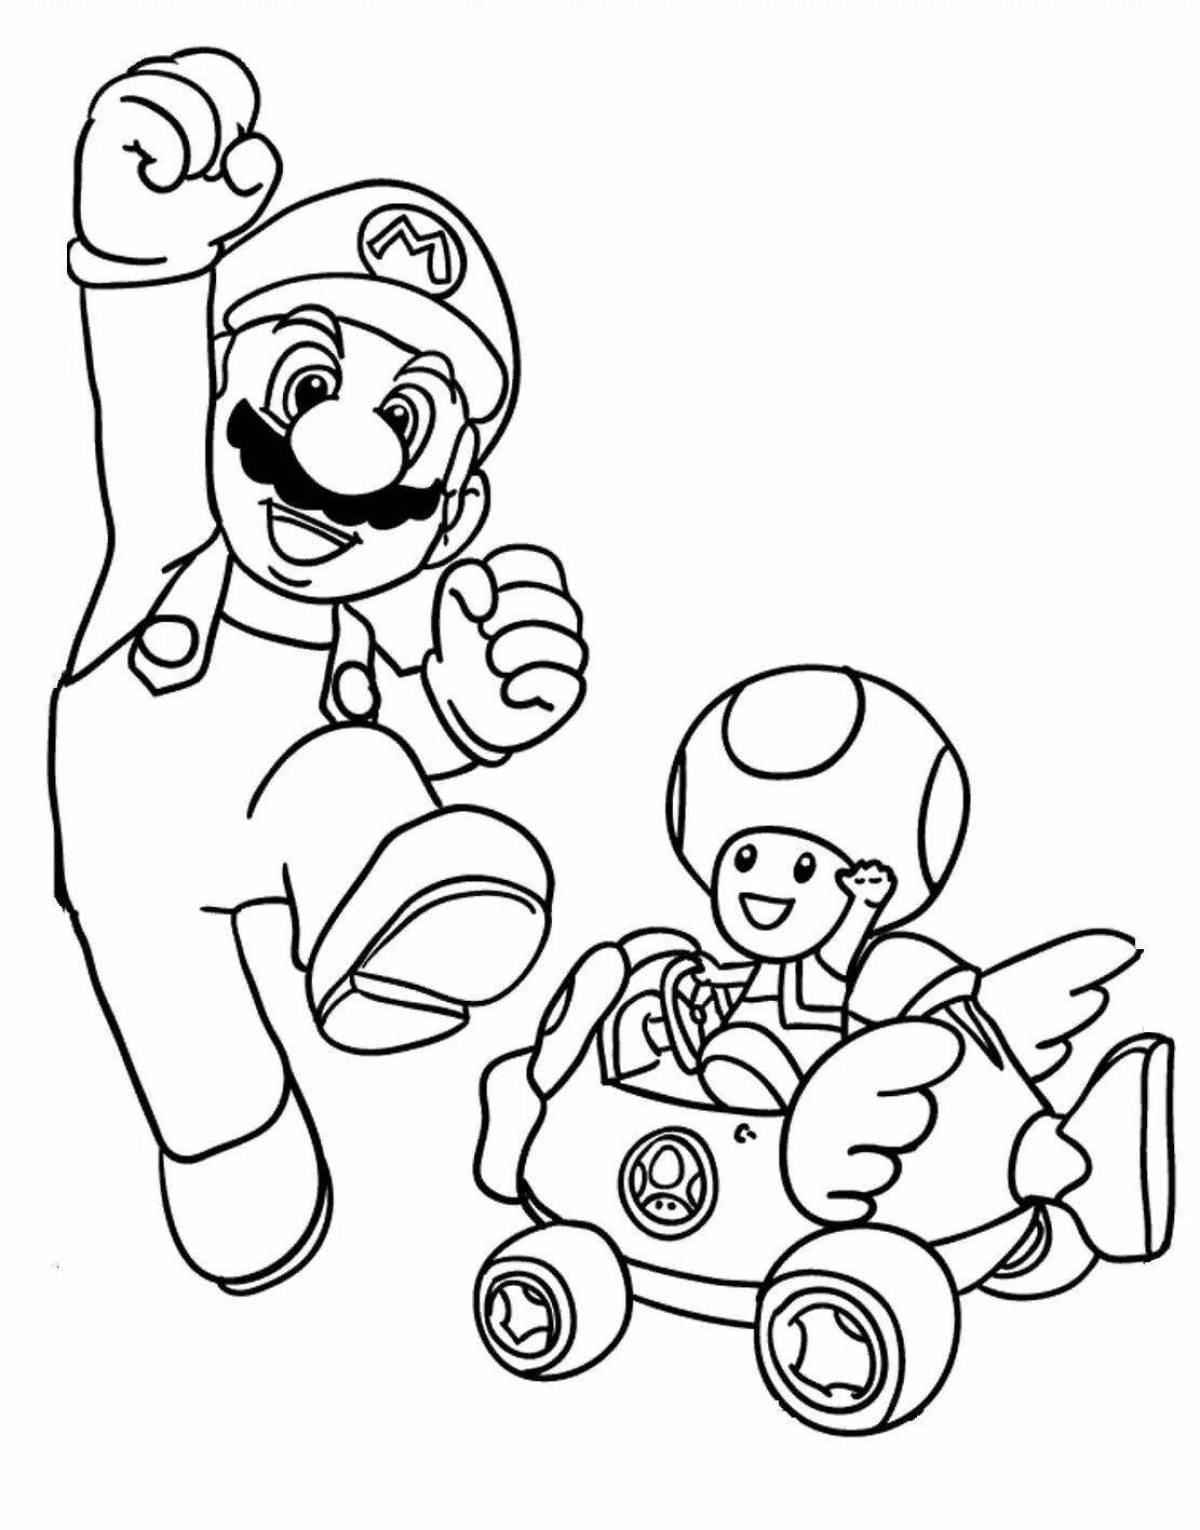 Color-frenzy mario by numbers coloring